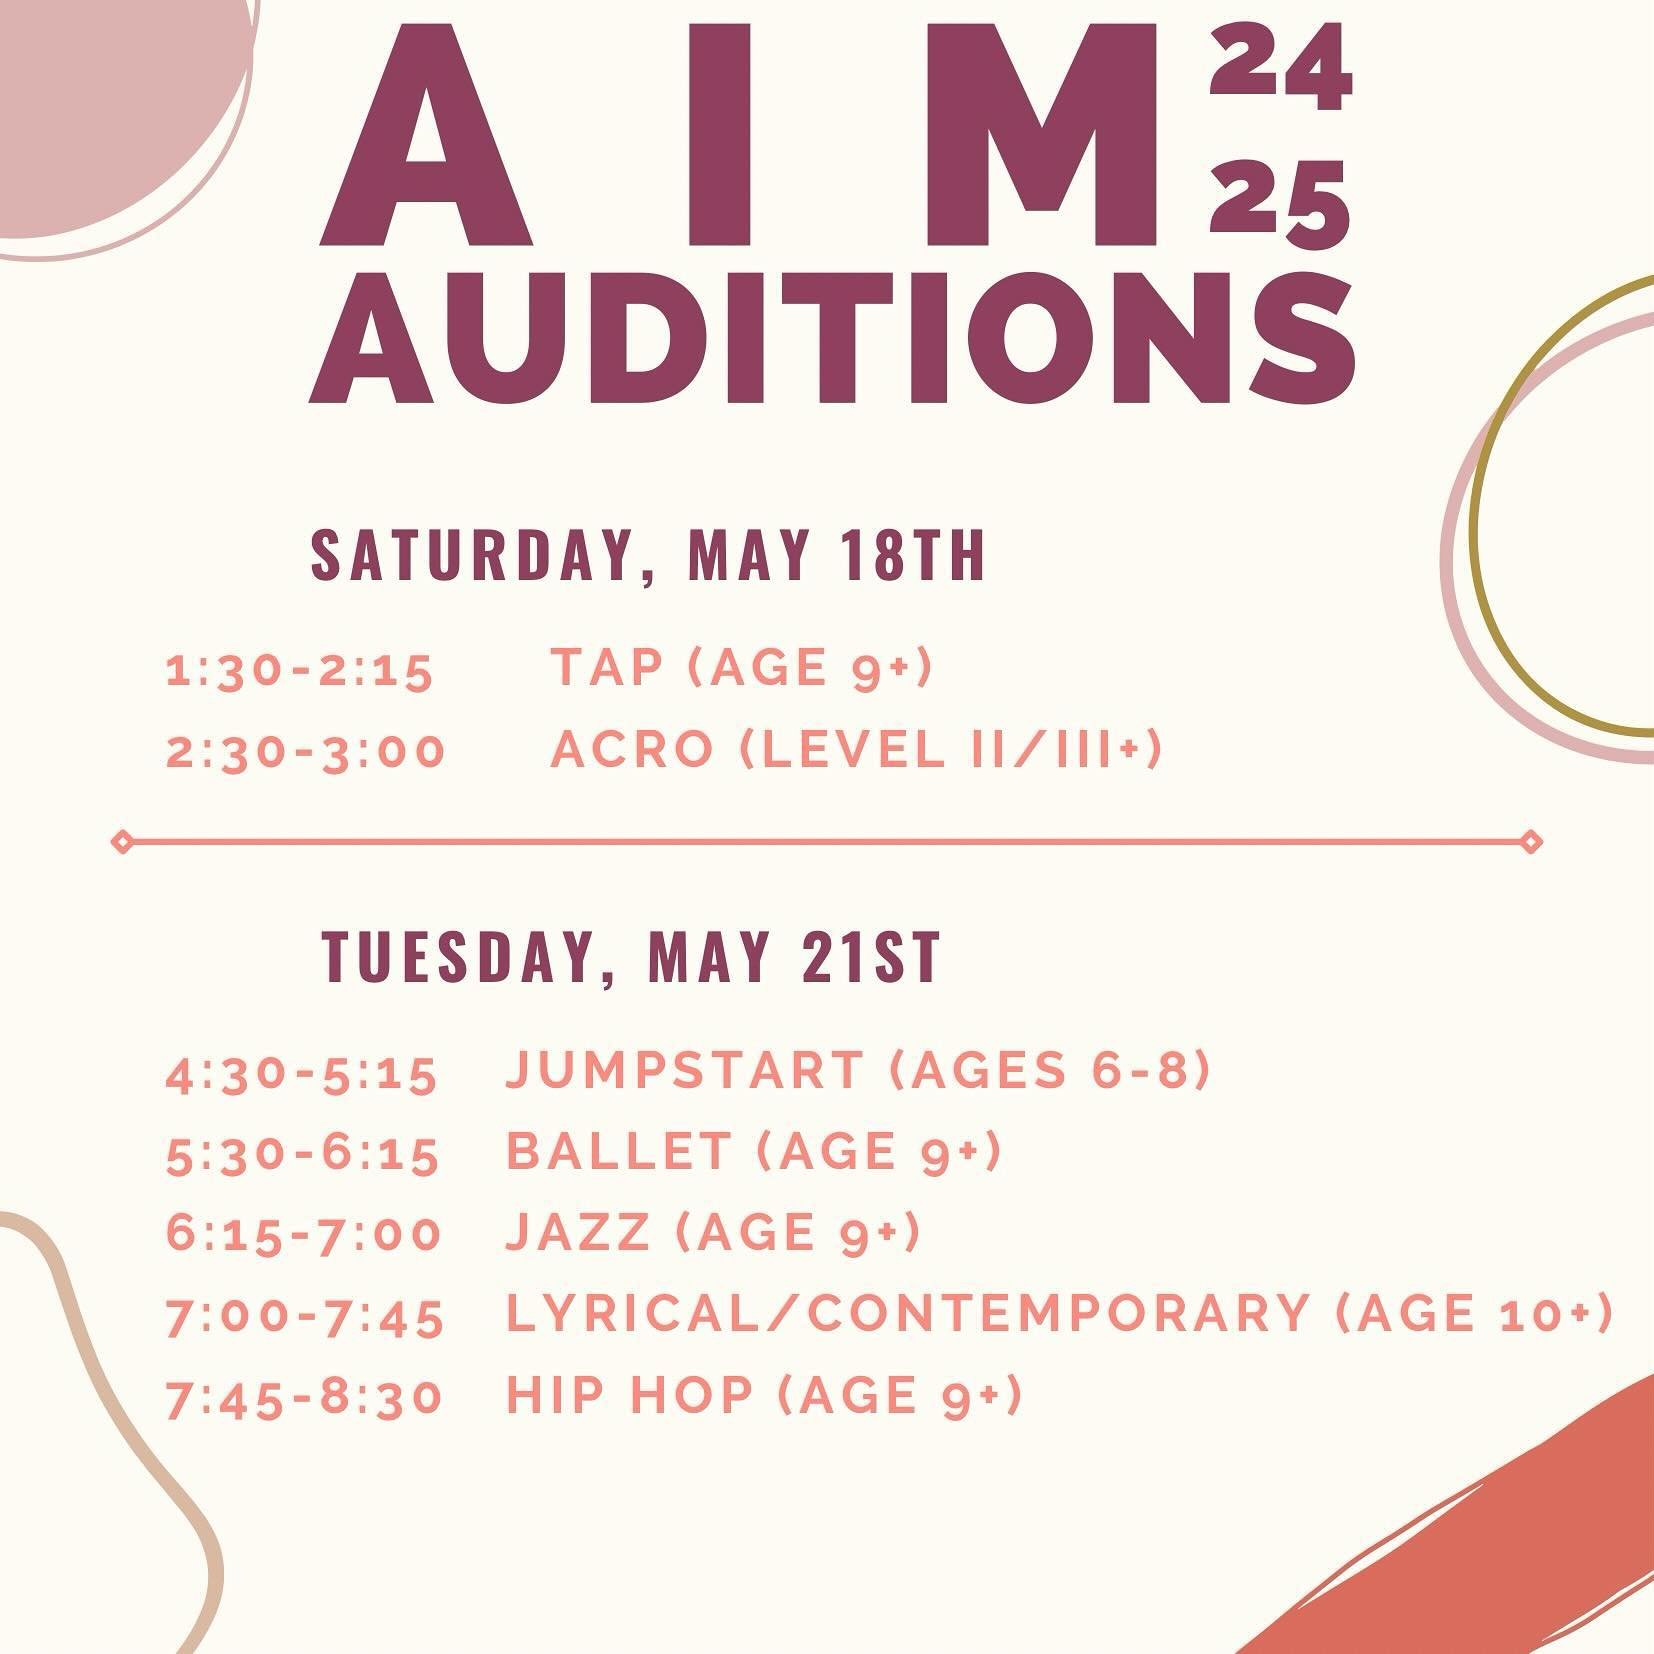 Gearing up for a new season of Art in Motion! AIM performing company auditions are taking place across two days this year:
Saturday, May 18th - Tap and Acro
Tuesday, May 21st - Jumpstart, Ballet, Jazz, Lyrical/Contemporary, and Hip Hop! 
We&rsquo;re 